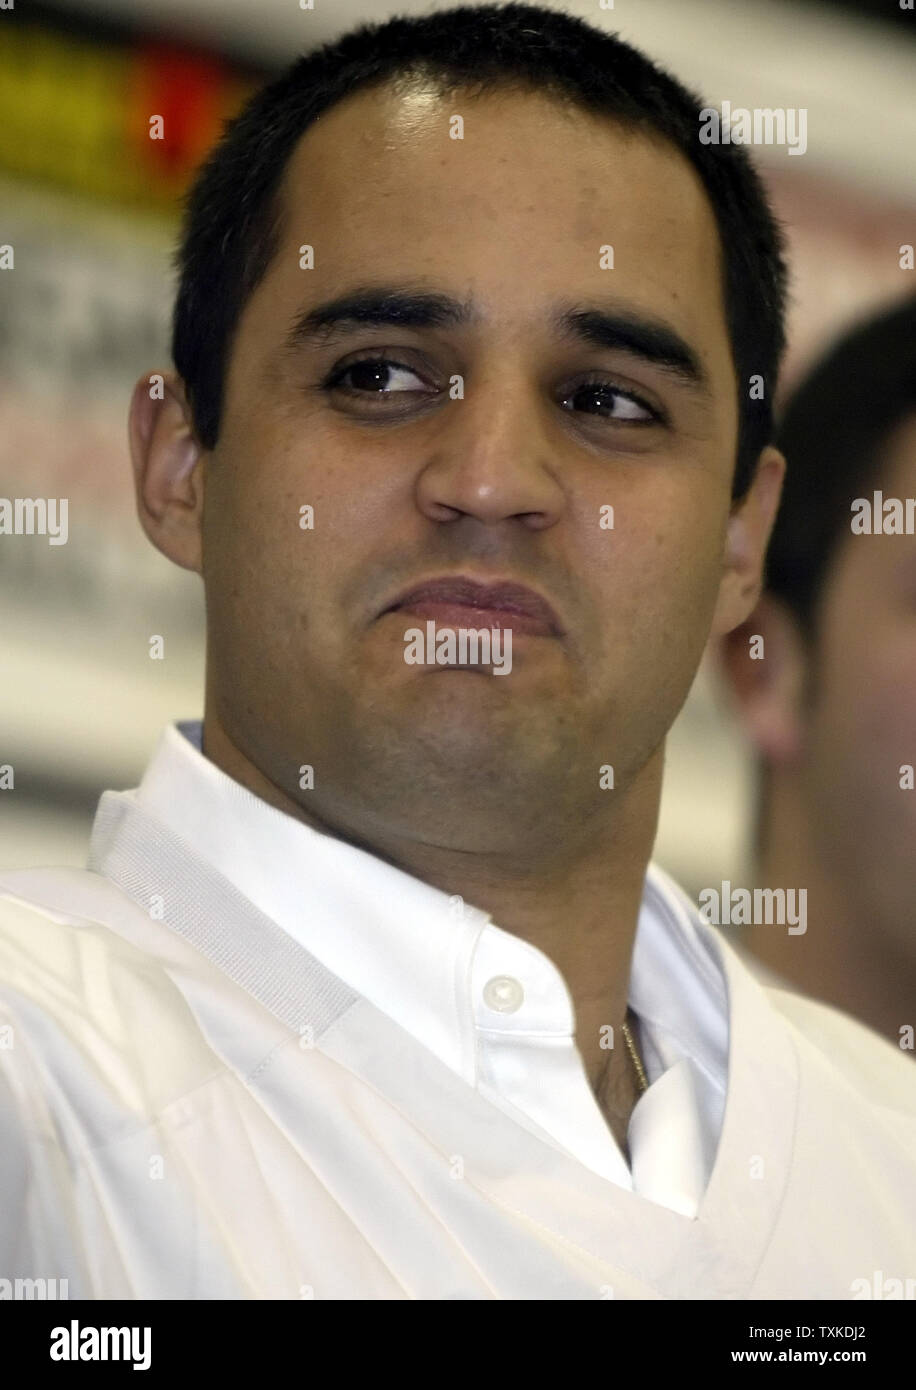 NASCAR driver Juan Pablo Montoya of Colombia answers questions during a press conference at Chip Ganassi Racing in Concord, NC on January 22, 2007 during the NASCAR NEXTEL Cup Media Tour. (UPI Photo/Nell Redmond) Stock Photo